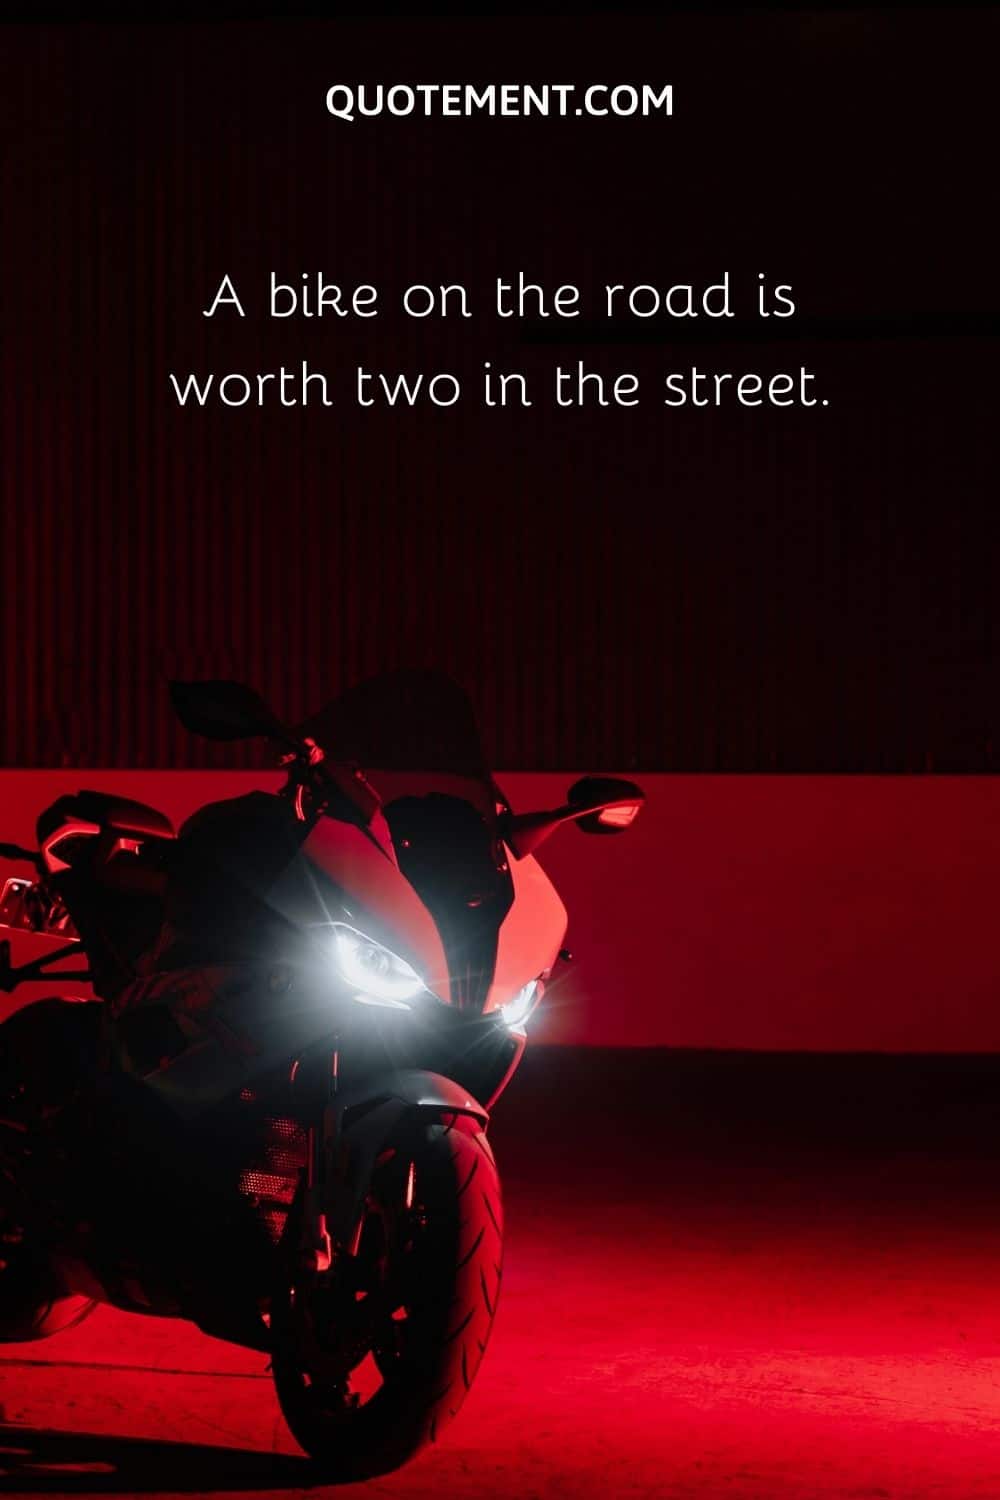 A bike on the road is worth two in the street.